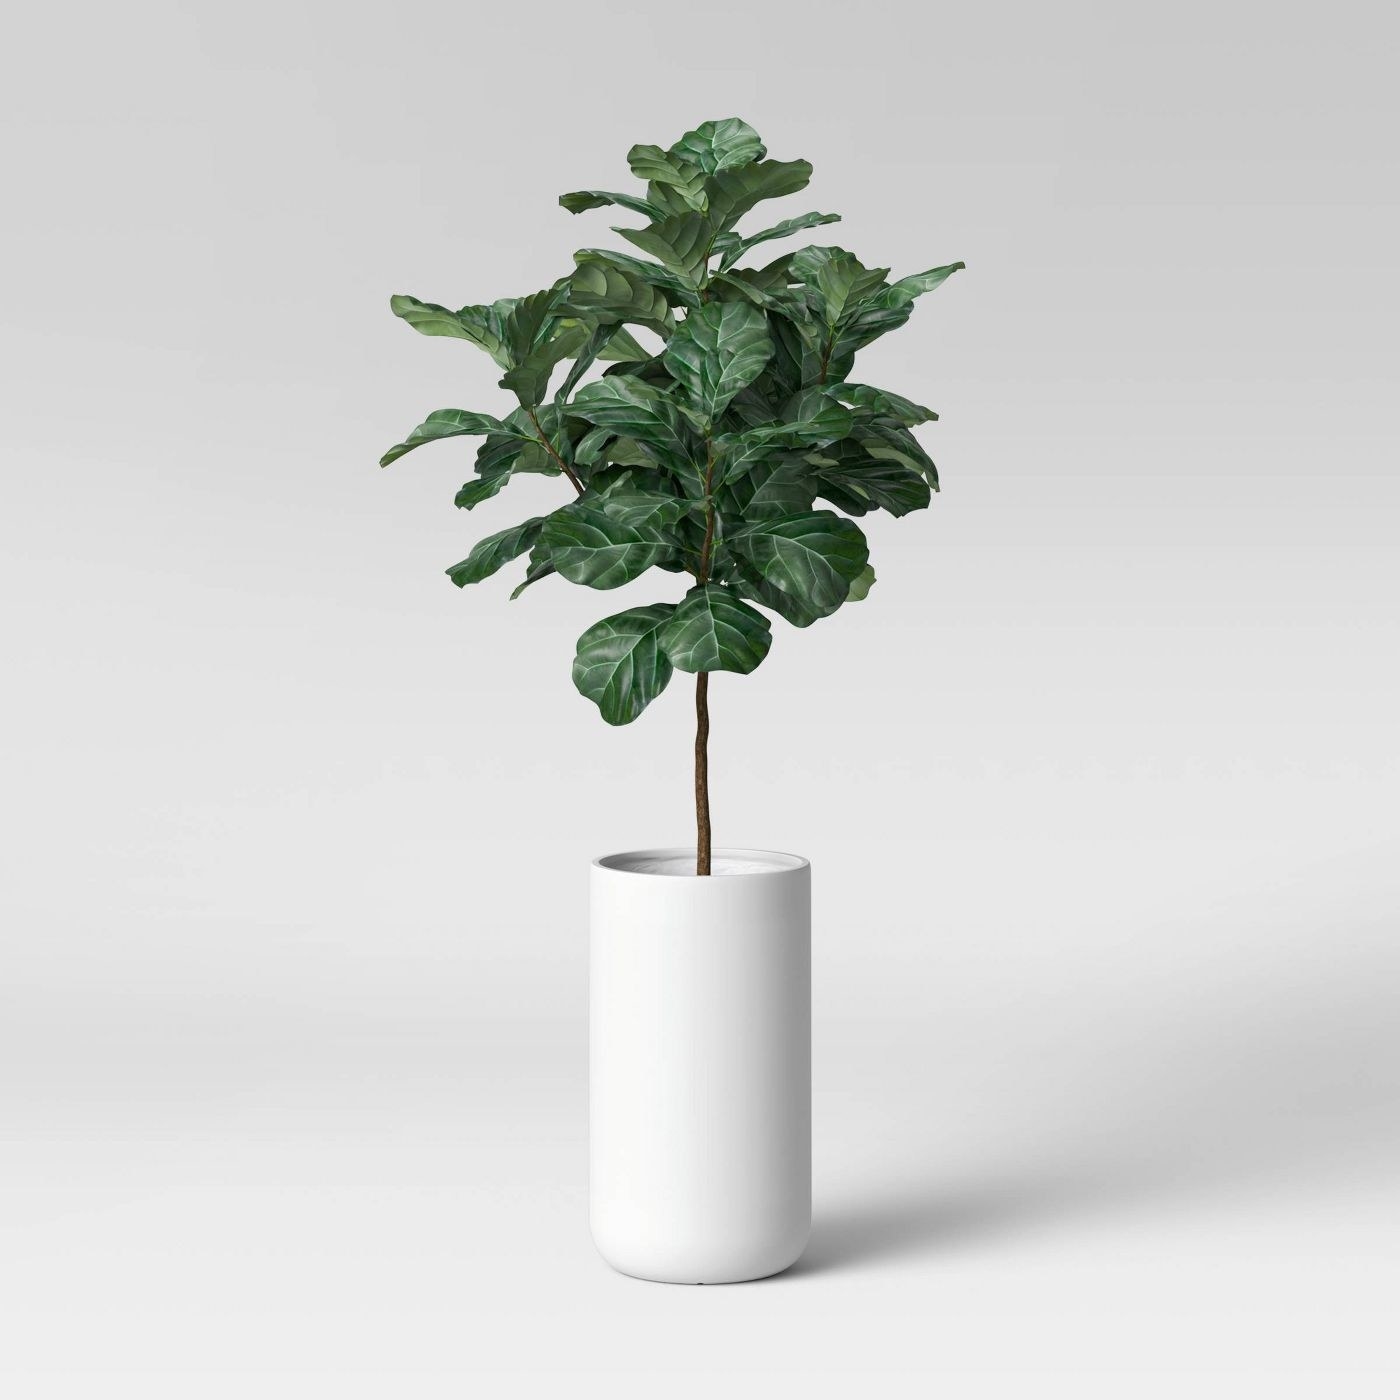 freestanding cylindrical white planter with a plant inside